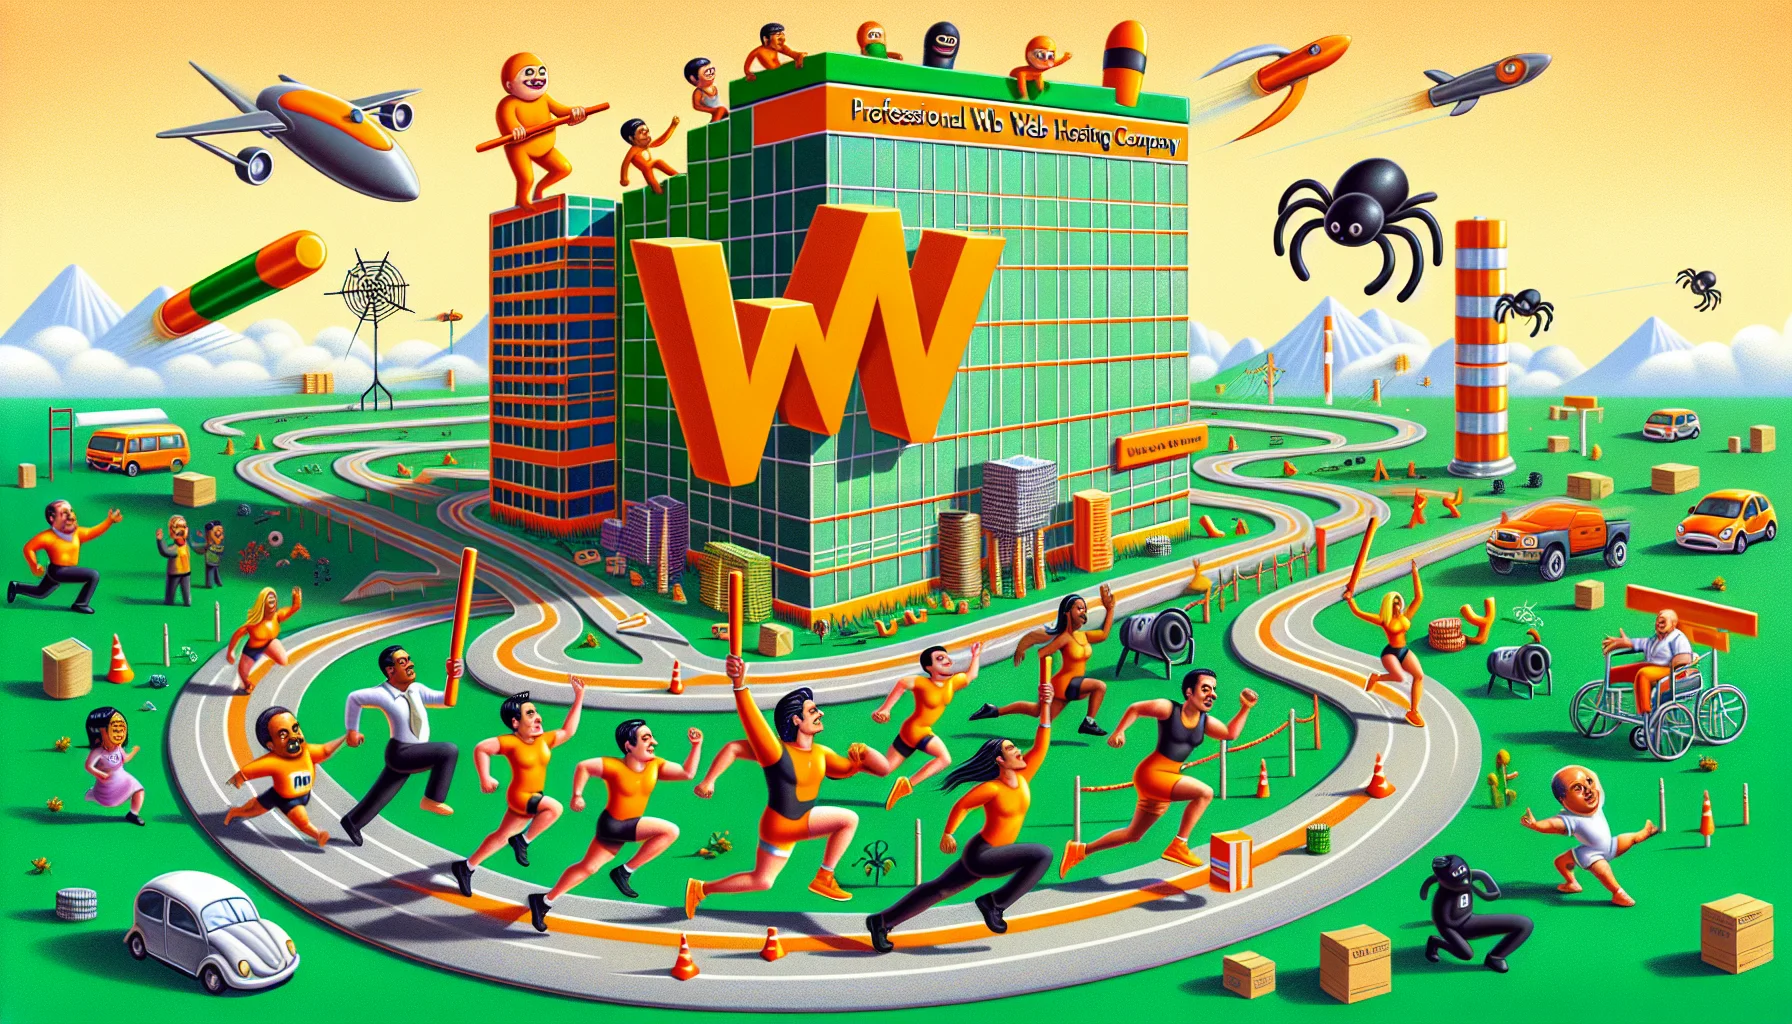 Create a fun and creative scenario where a domain is being transferred to an iconic orange and green theme professional web hosting company. The image is surrealistic and somewhat humorous. In it, a group of characters, each representative of different descents like Black, South Asian, Hispanic, and Middle-Eastern are happily participating in a 'relay race'. The relay baton is an oversized stylized 'www' sign, symbolizing the domain. The race route is dotted with humorous obstacles like comically oversized computer mice and wacky web spiders. The finish line is a large structure that looks like the facade of the web hosting company headquarters, appealing in its vibrant orange and green color theme. This image showcases the synergistic combination of humour, creativity, and professionalism in a website hosting context.